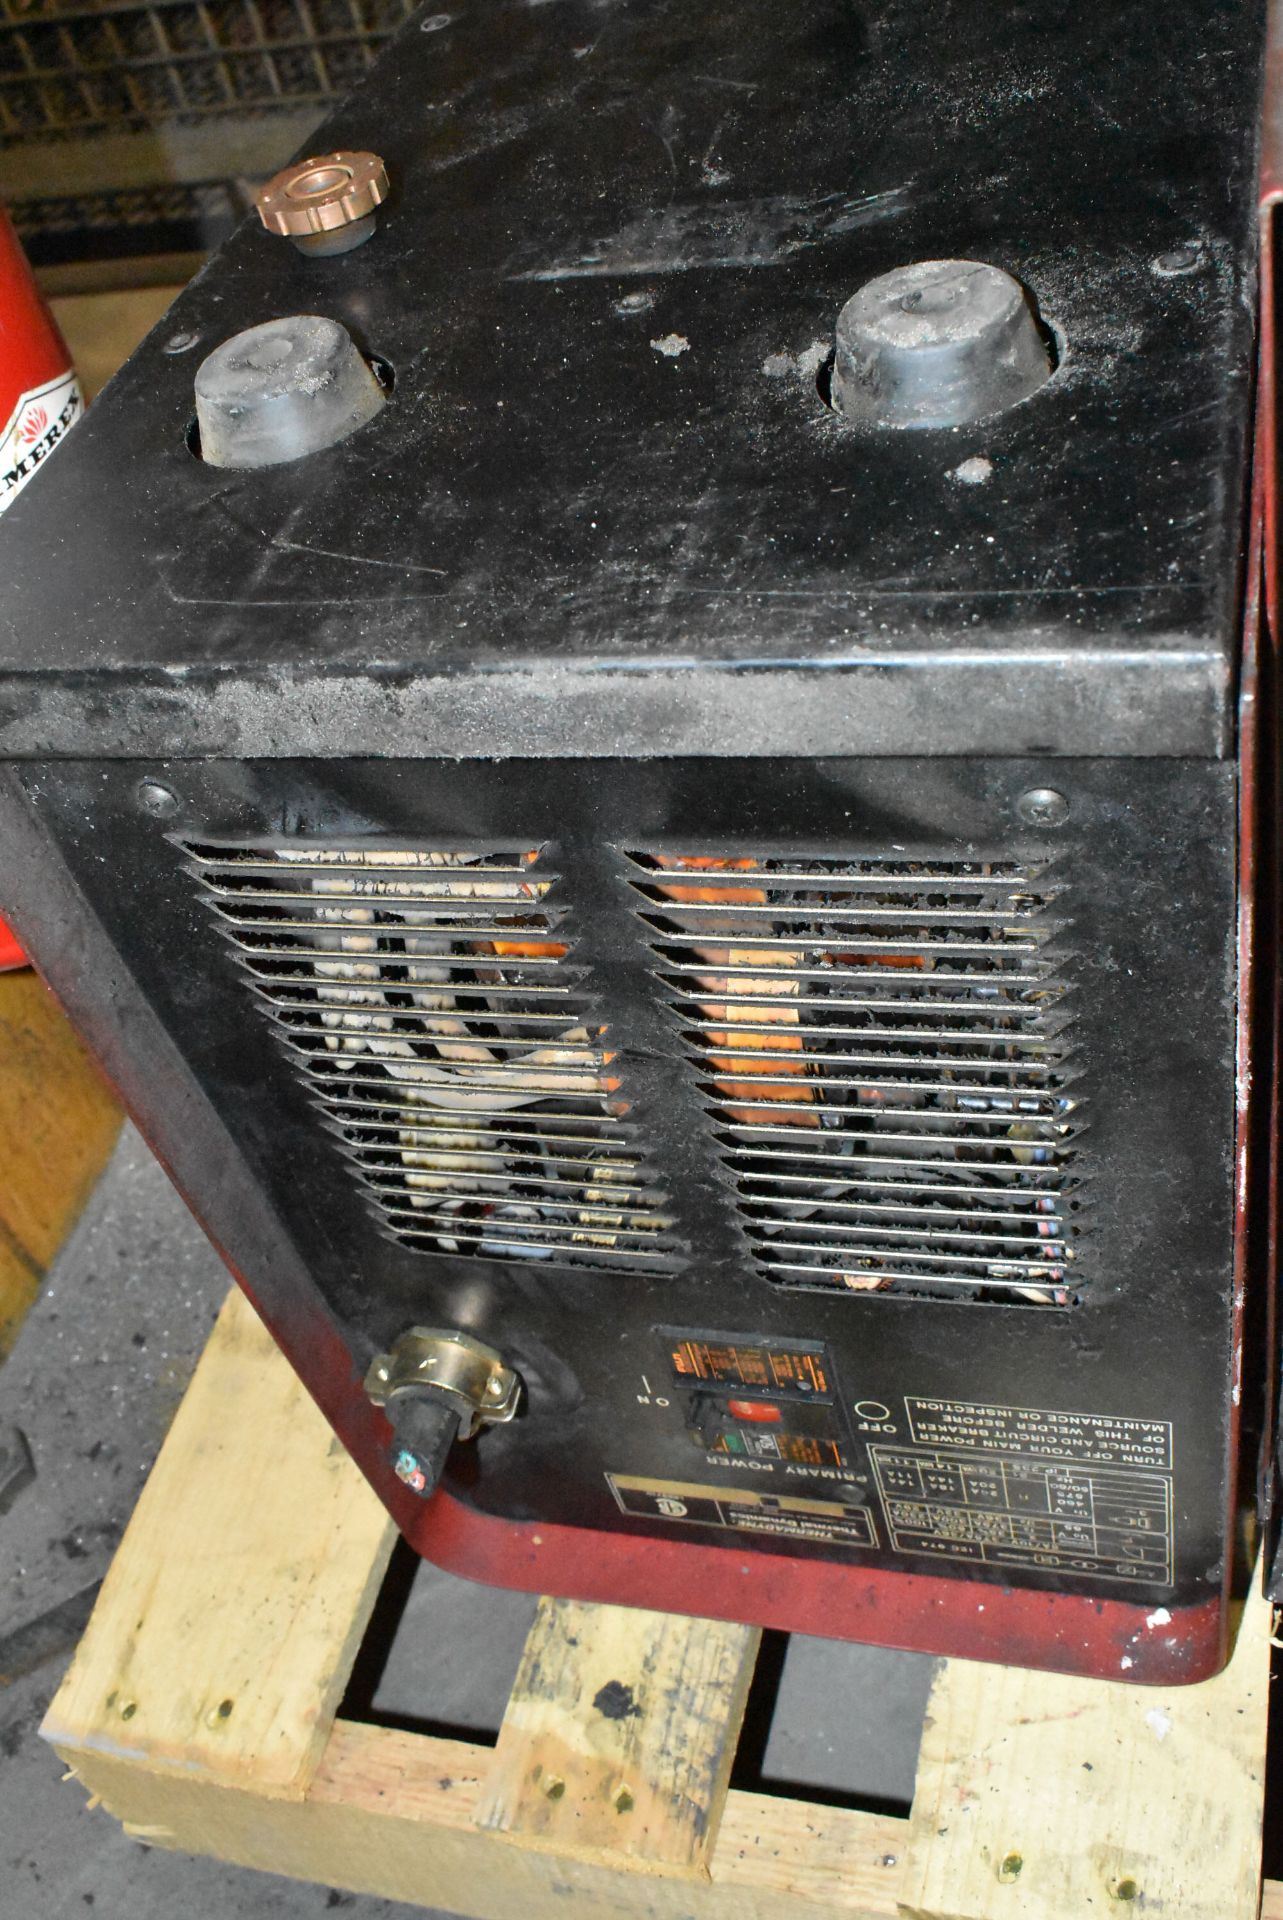 LOT/ GULLCO WELDING ELECTRODE OVEN, (2) THERMAL DYNAMICS PLASMA CUTTING POWER SOURCES, CRATE WITH - Image 6 of 10